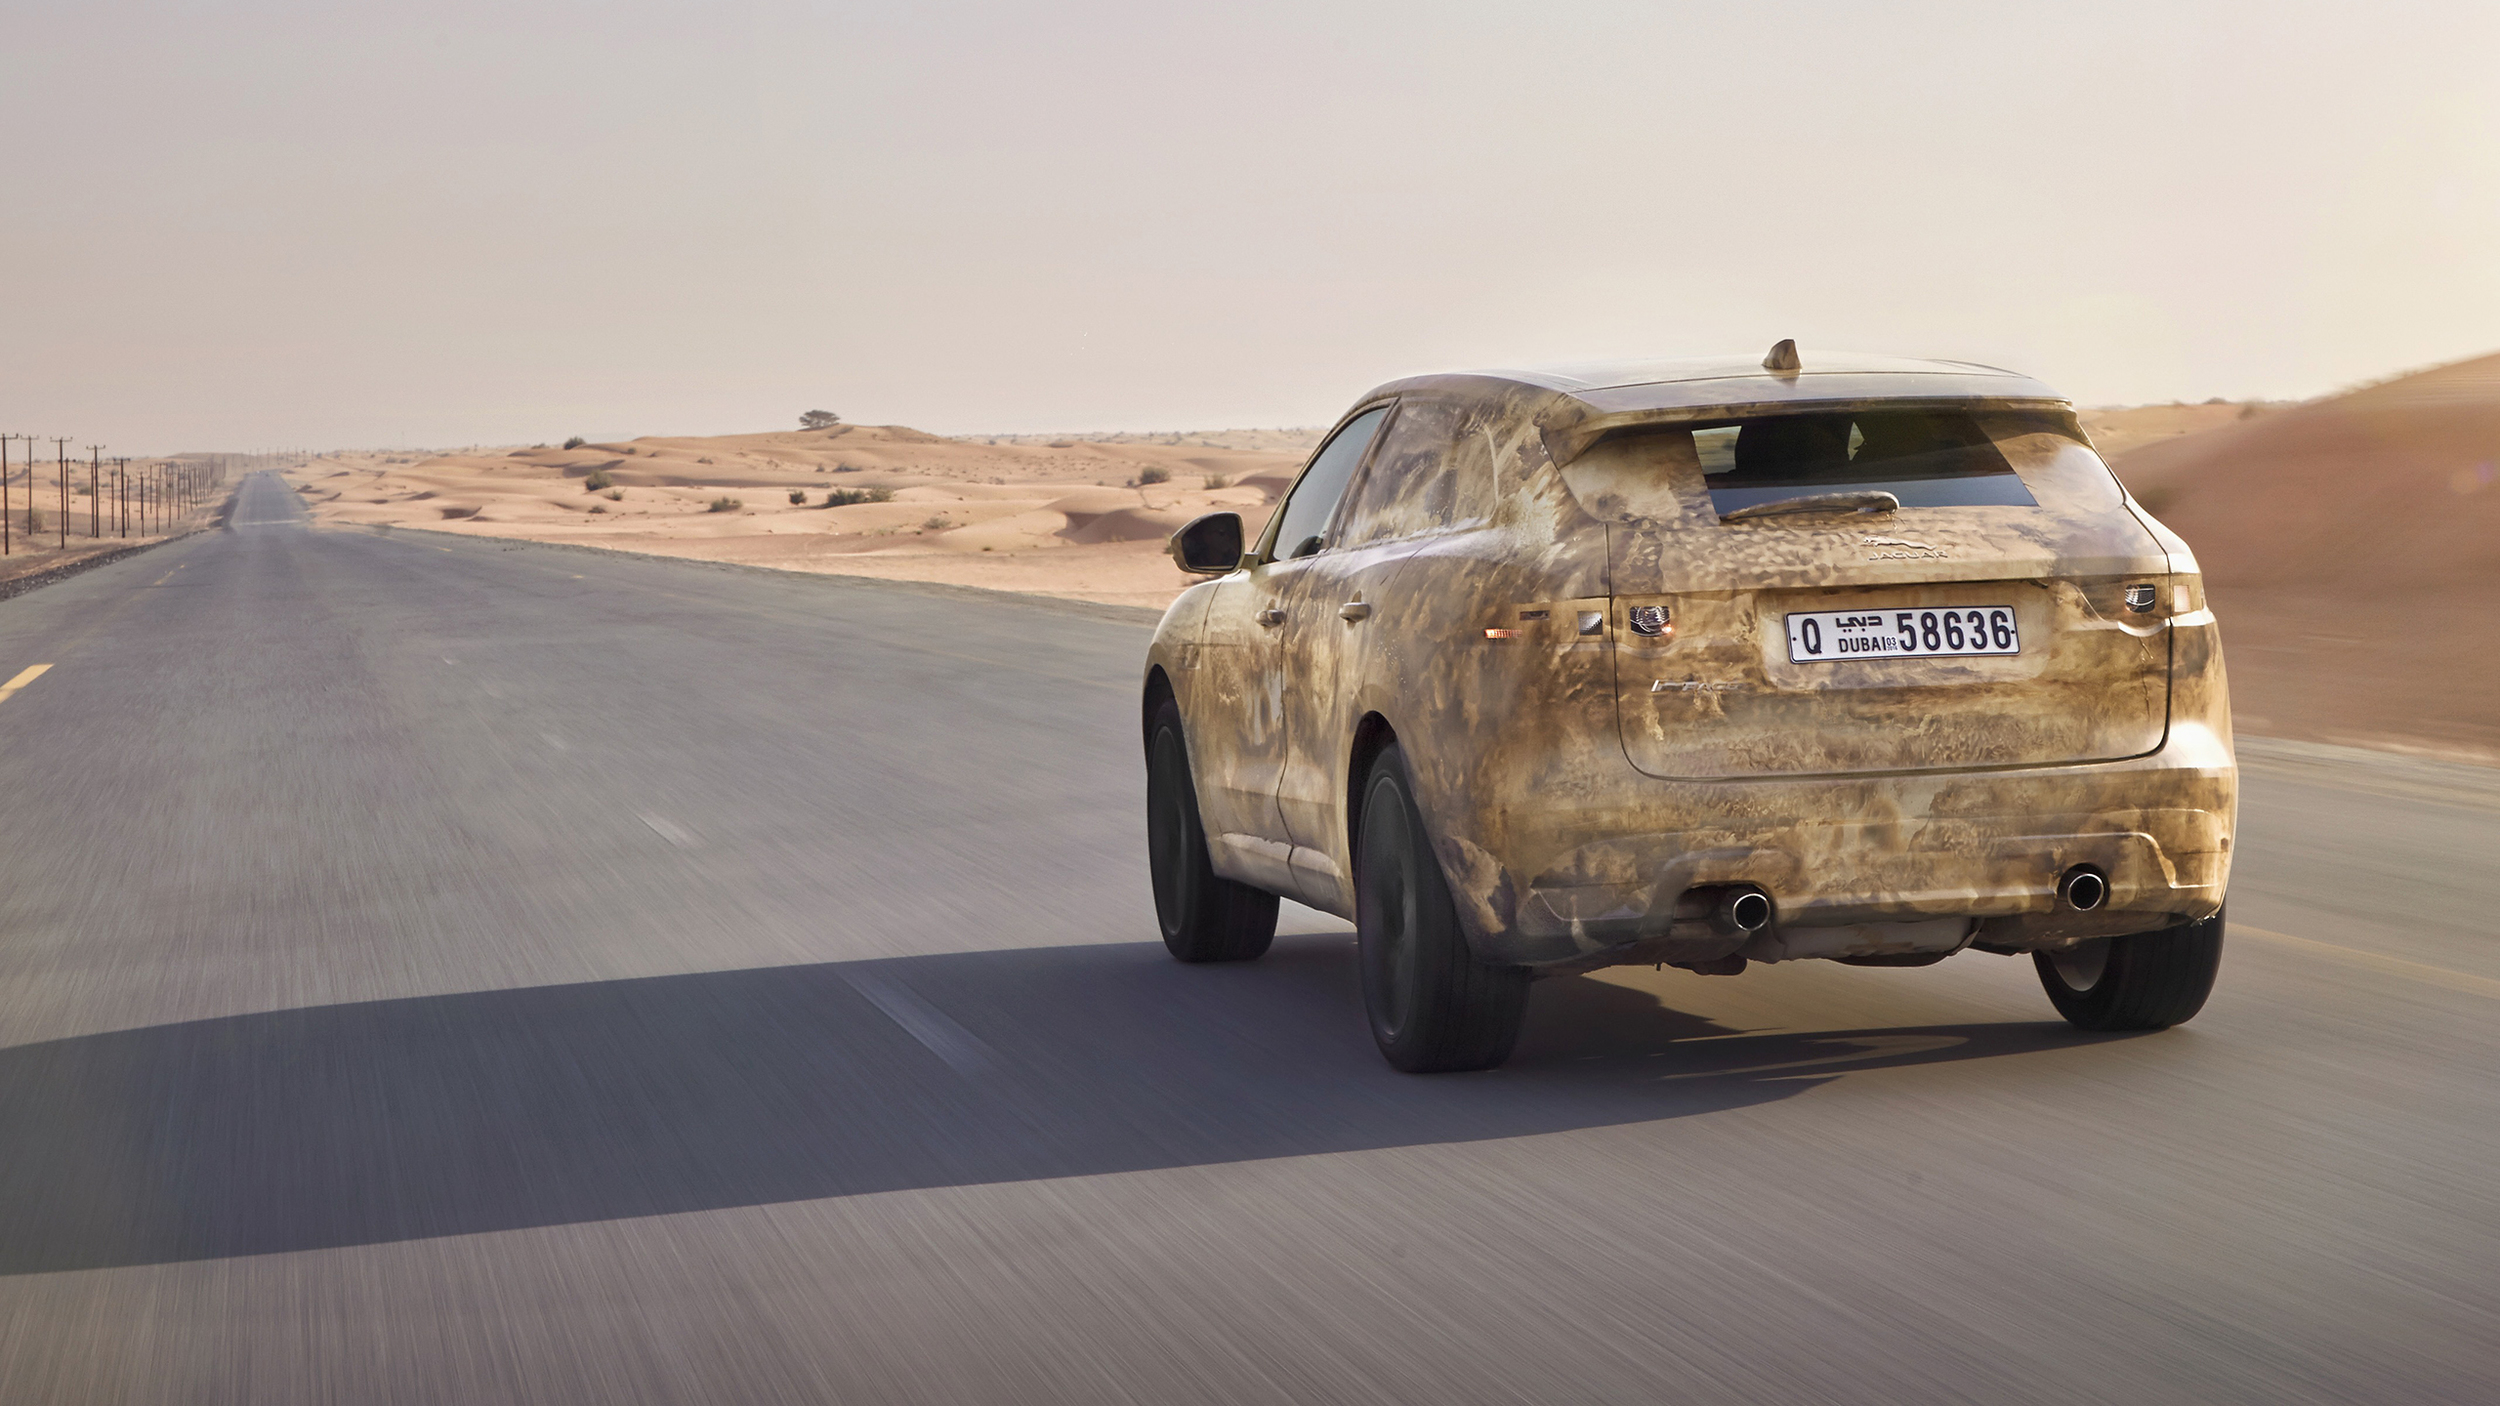 New Jaguar F-Pace tested to the extreme